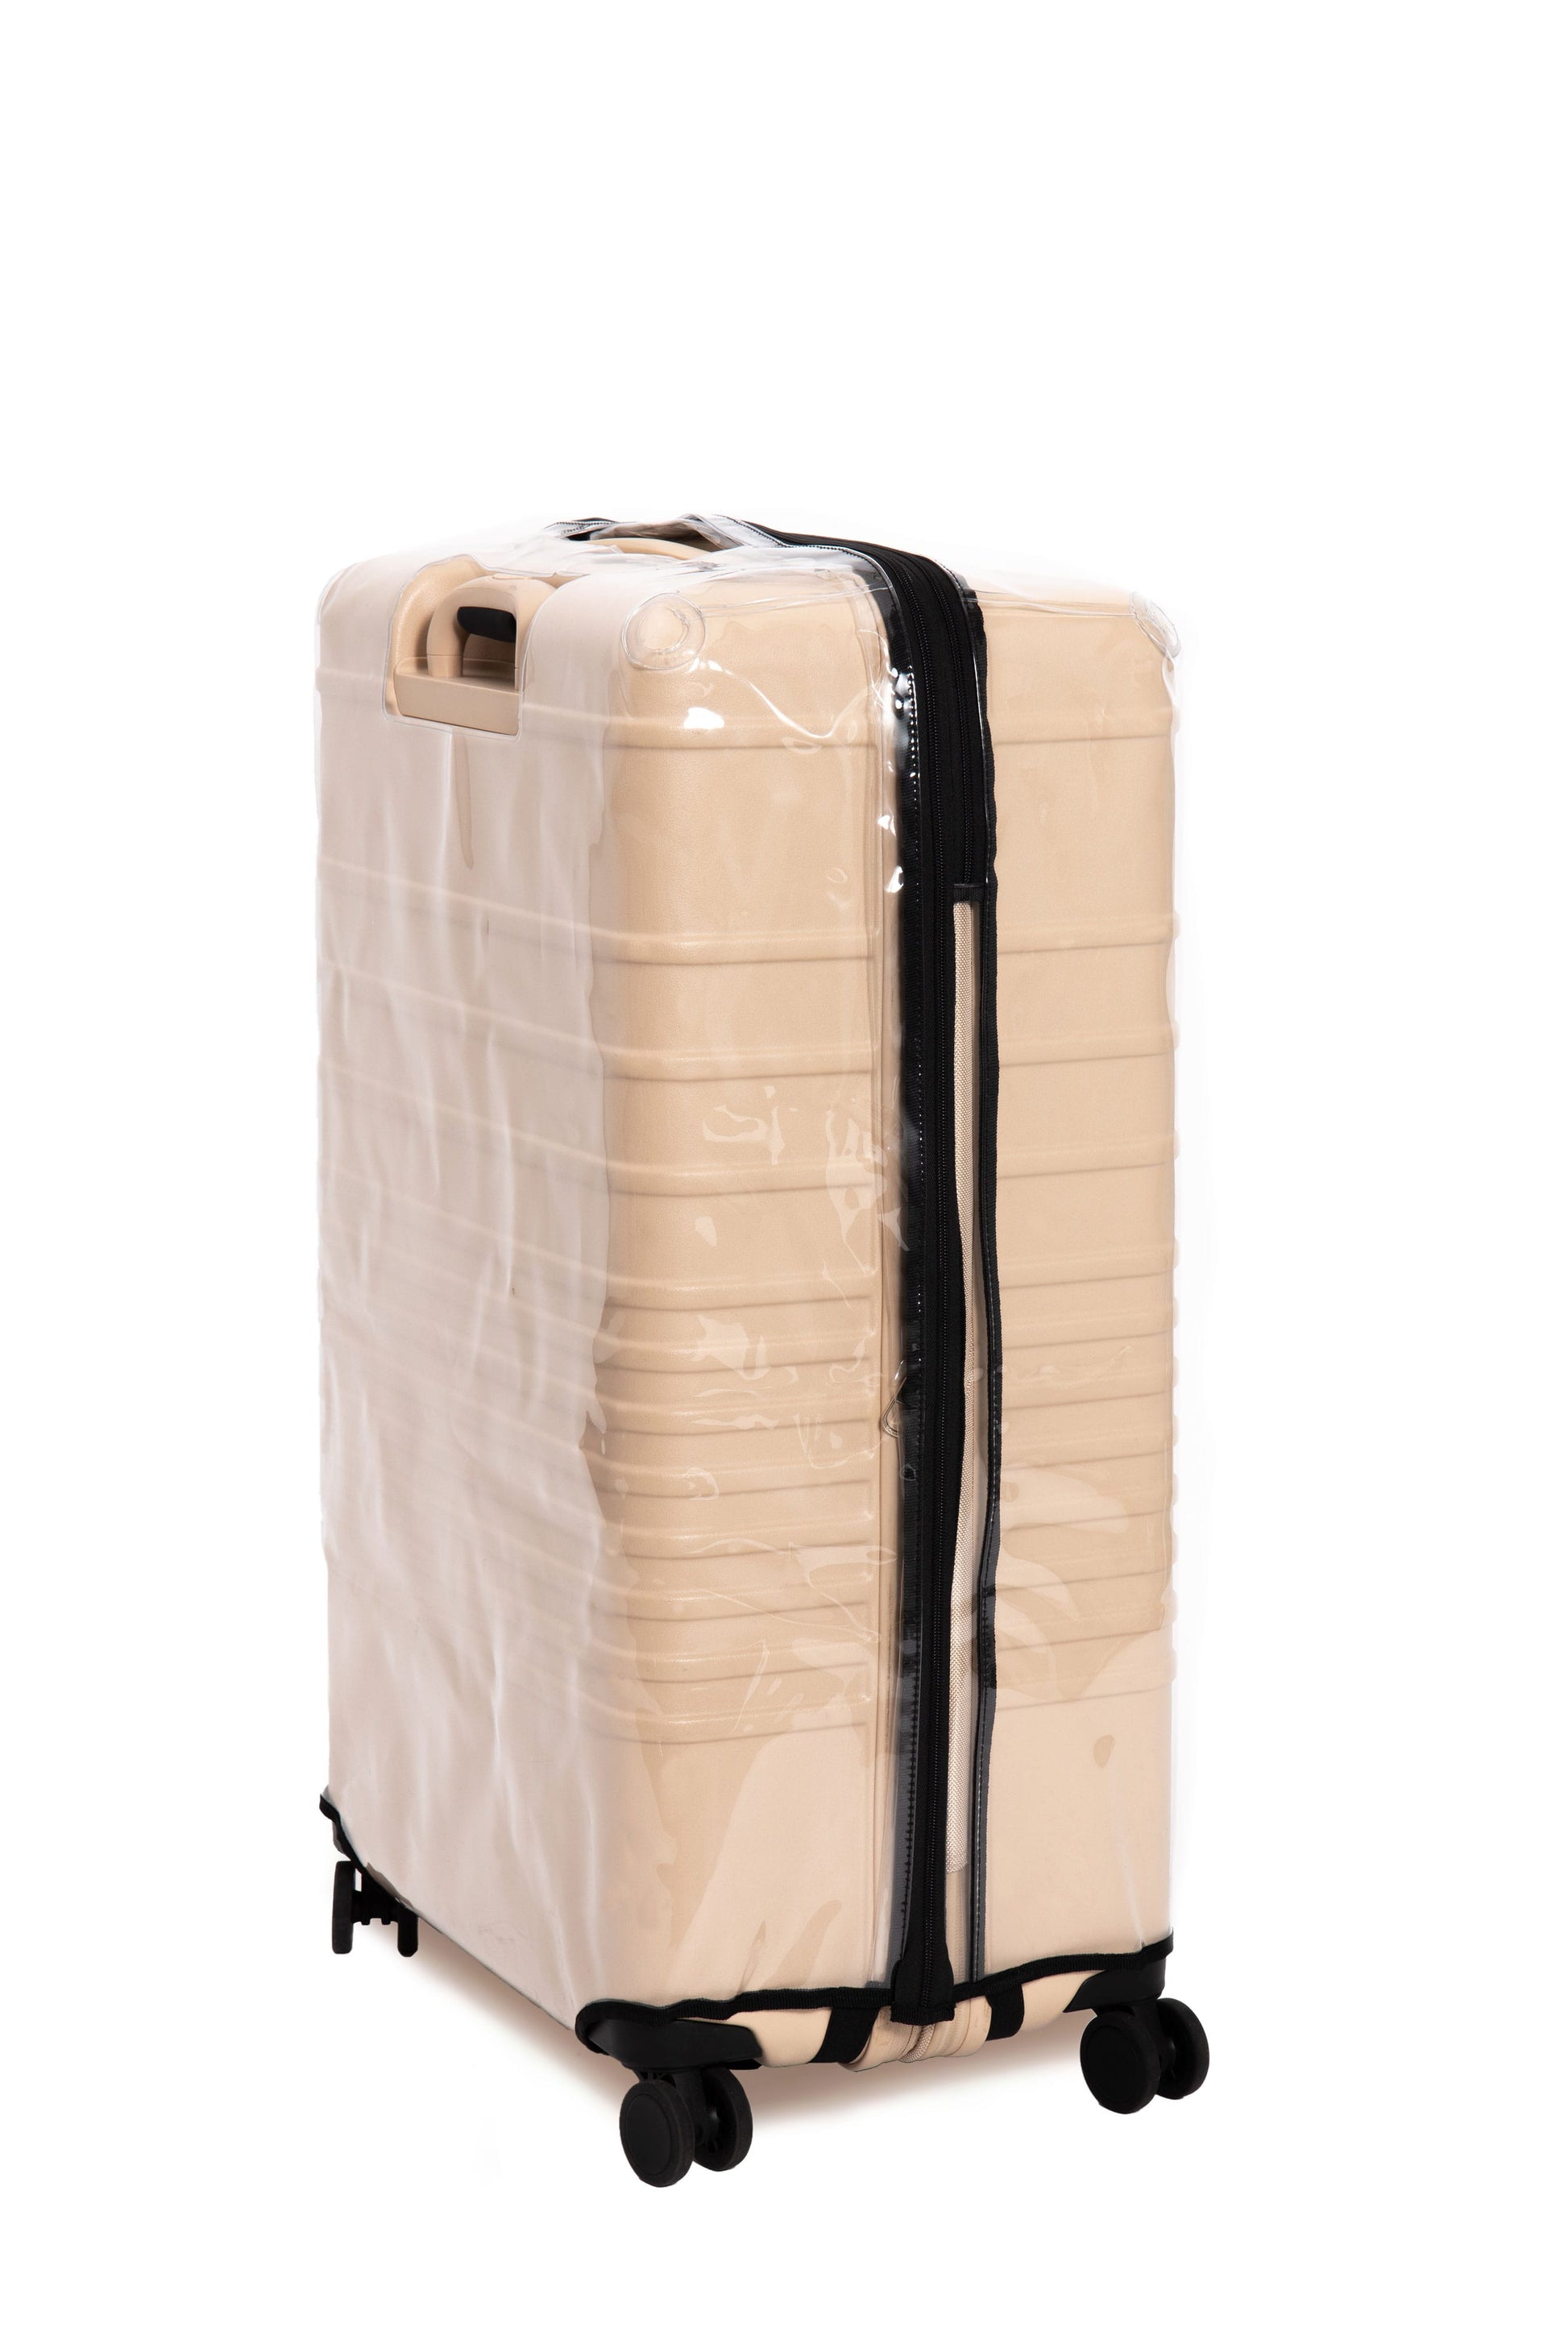 The 29 Large Luggage Cover